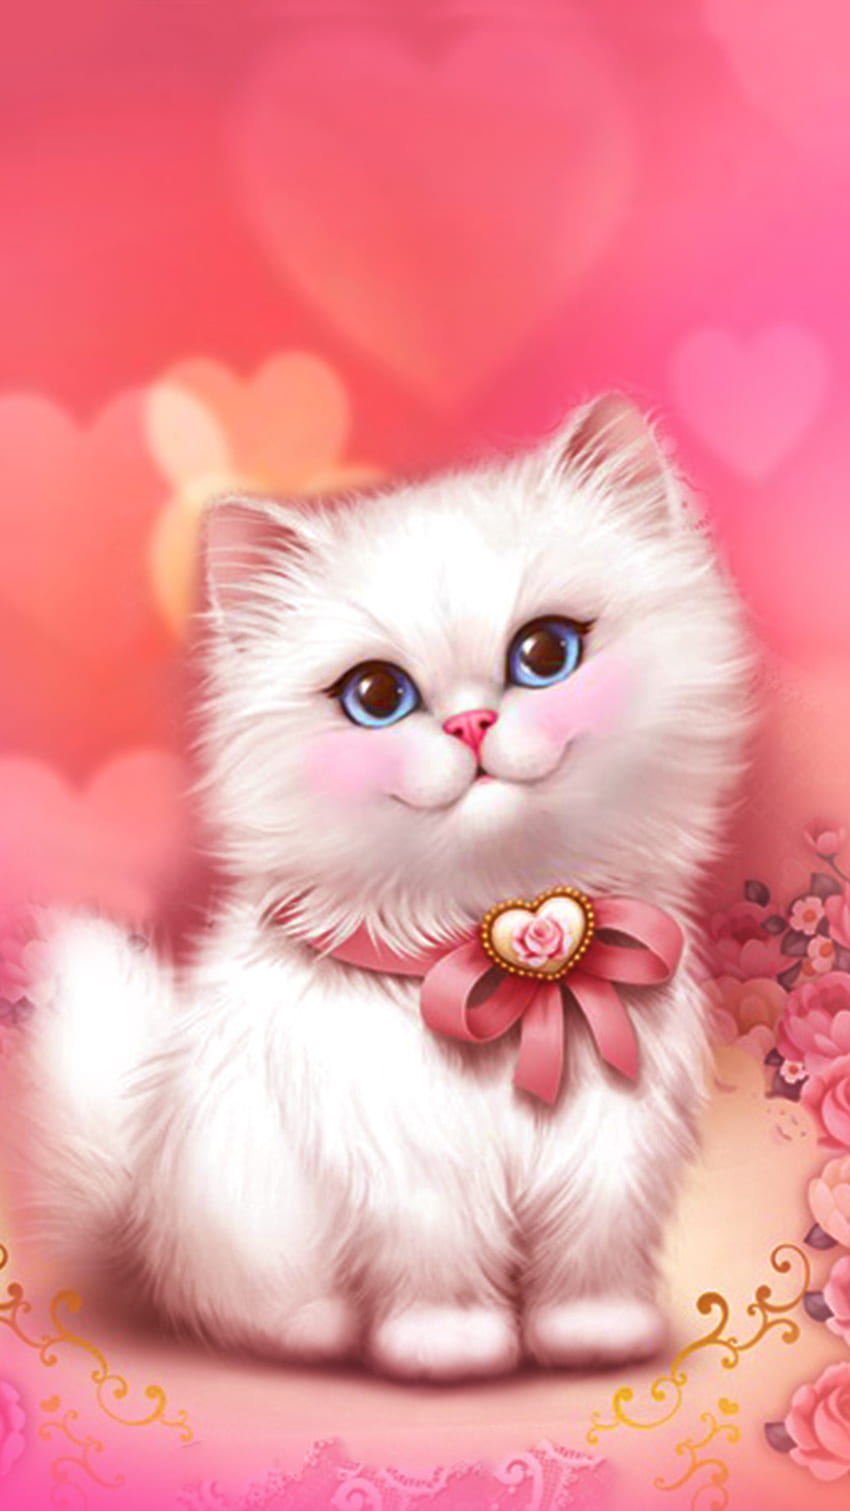 Full 4K Incredible Collection of Over 999 Pink Cute Cat Images